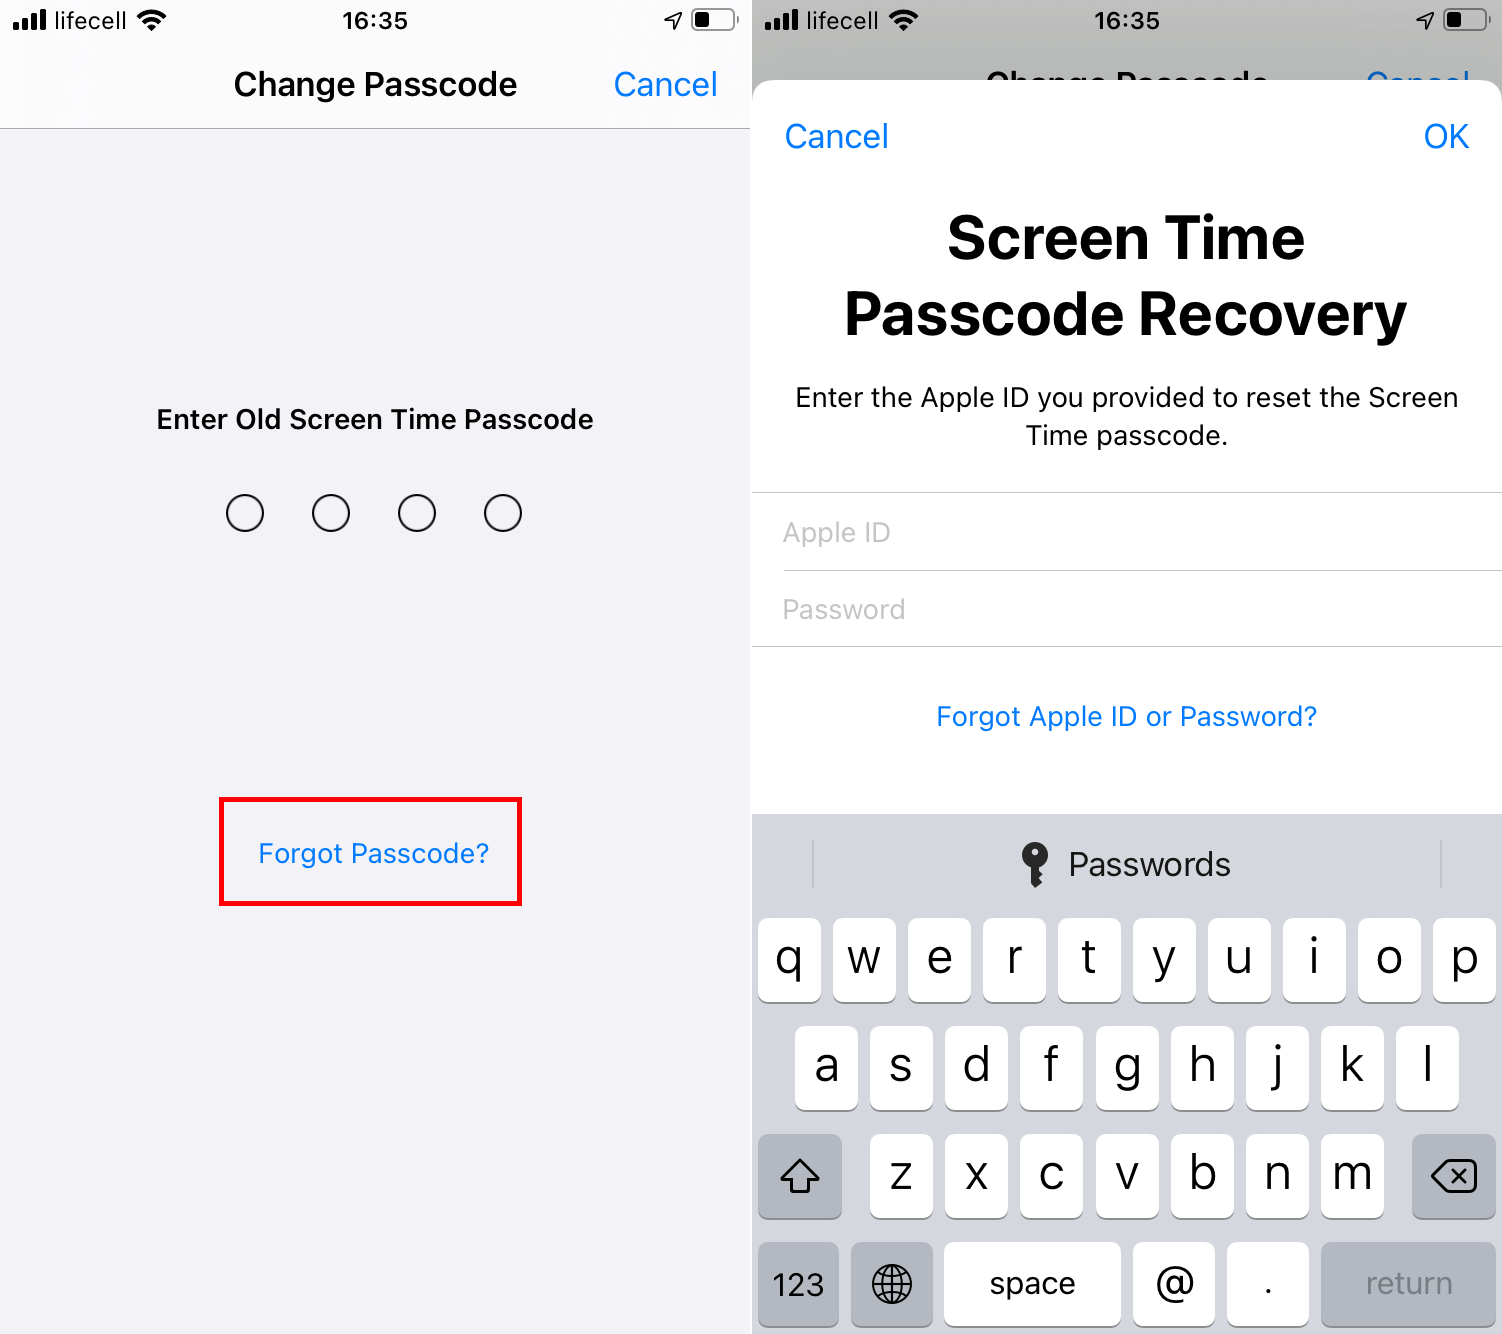 turn off Screen Time passcode